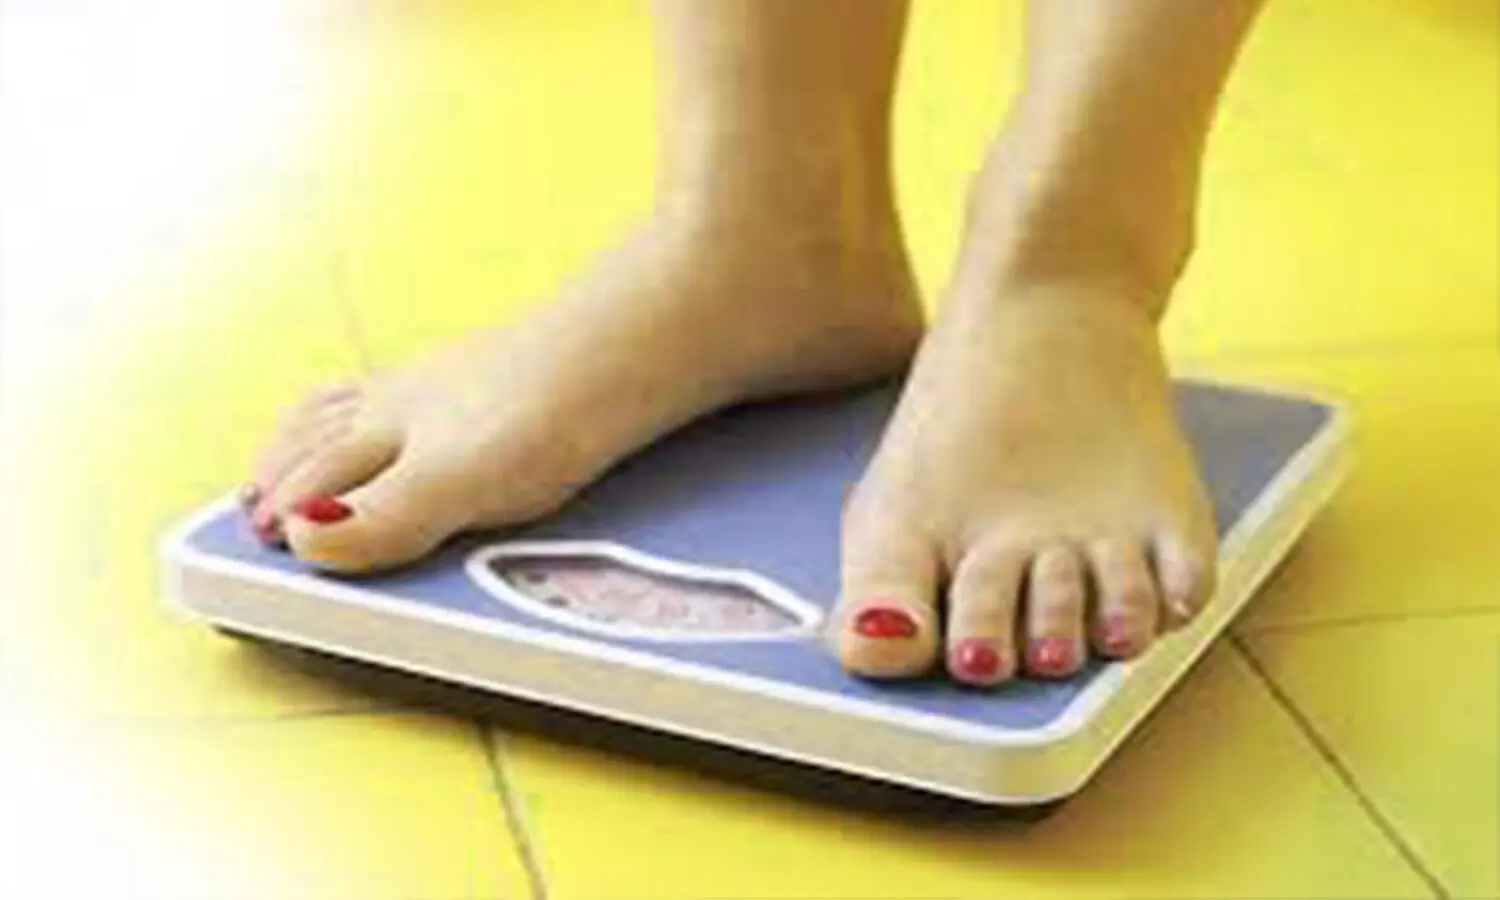 Weight loss reduces the risk of growths linked to colorectal cancer